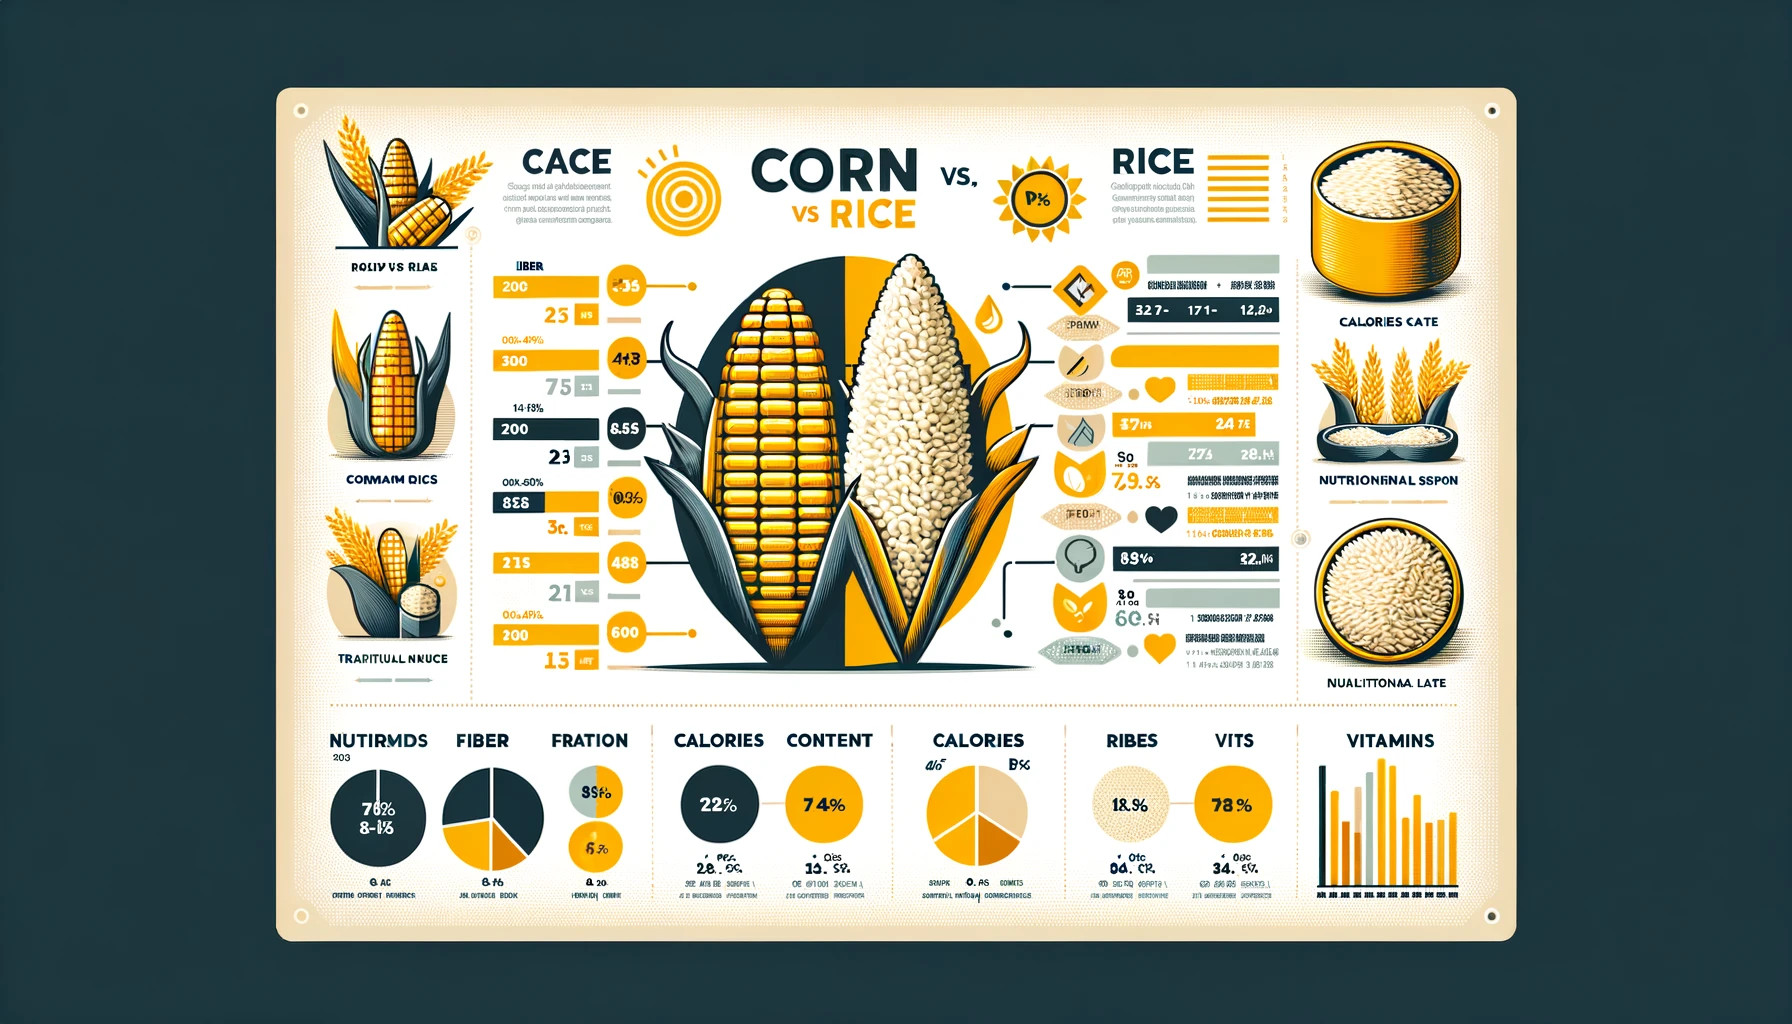 An infographic comparing the nutritional values of corn and rice